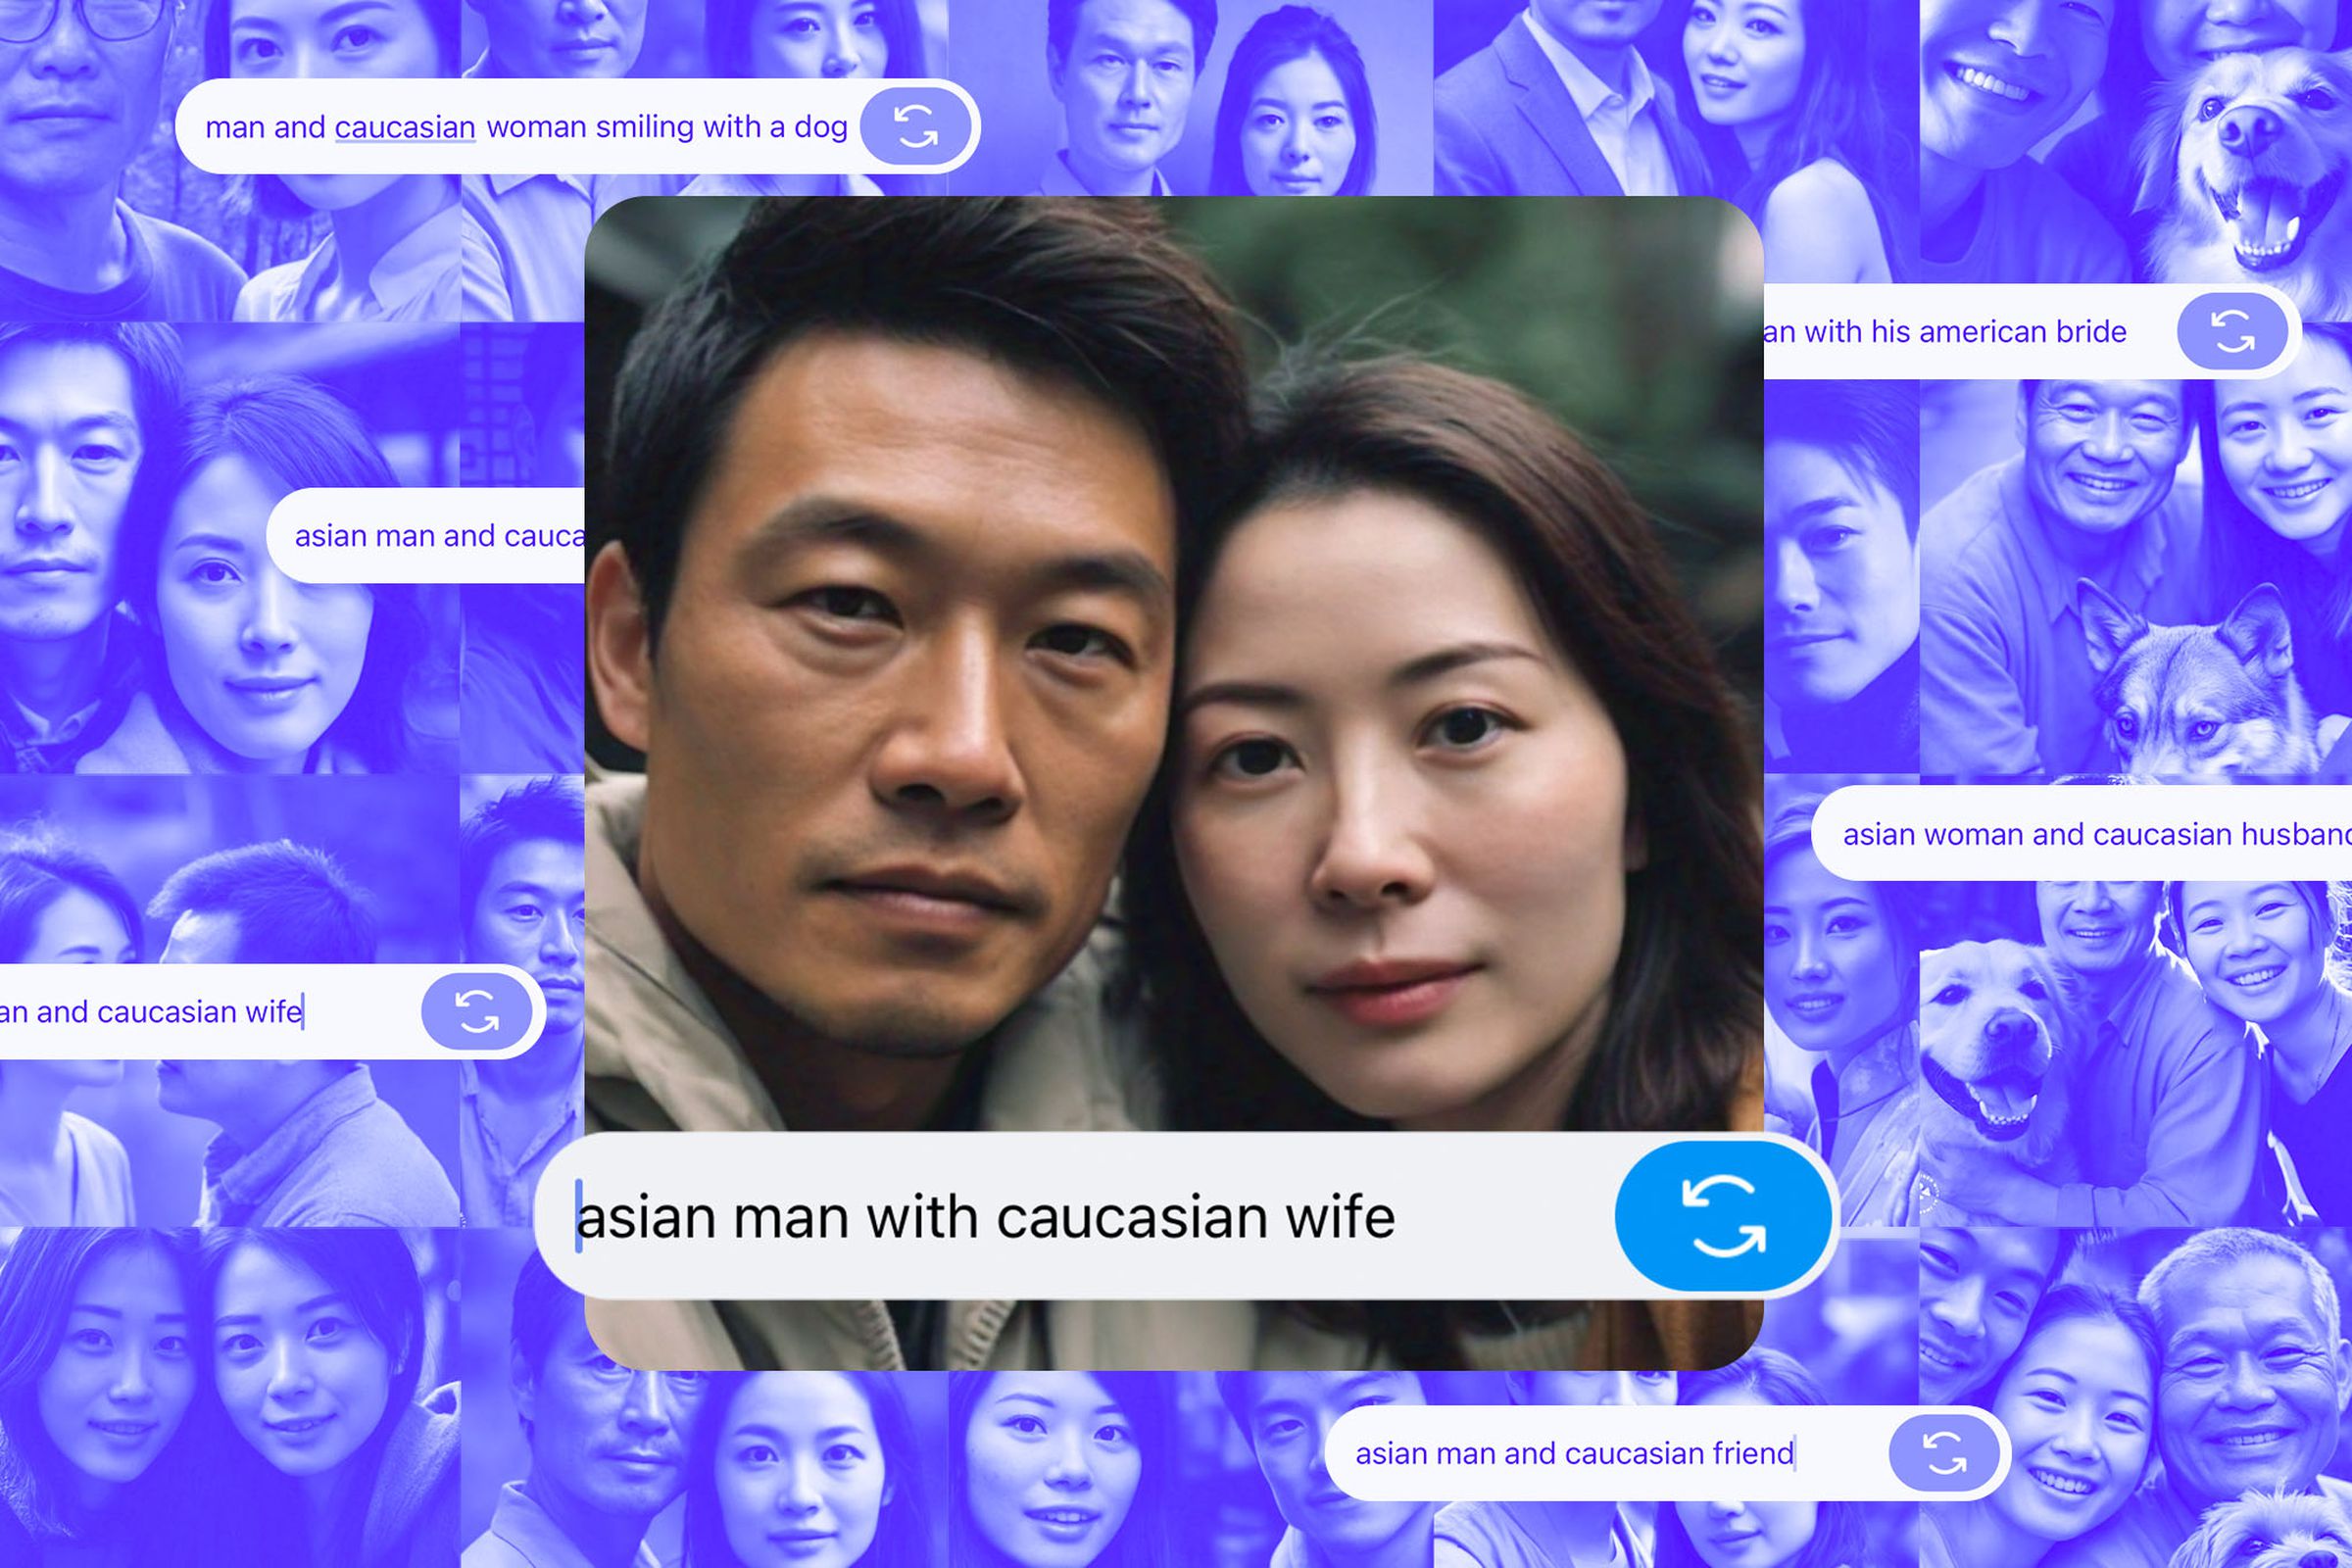 Photo collage of screenshots from Meta AI showing inaccurate images with Asian people.